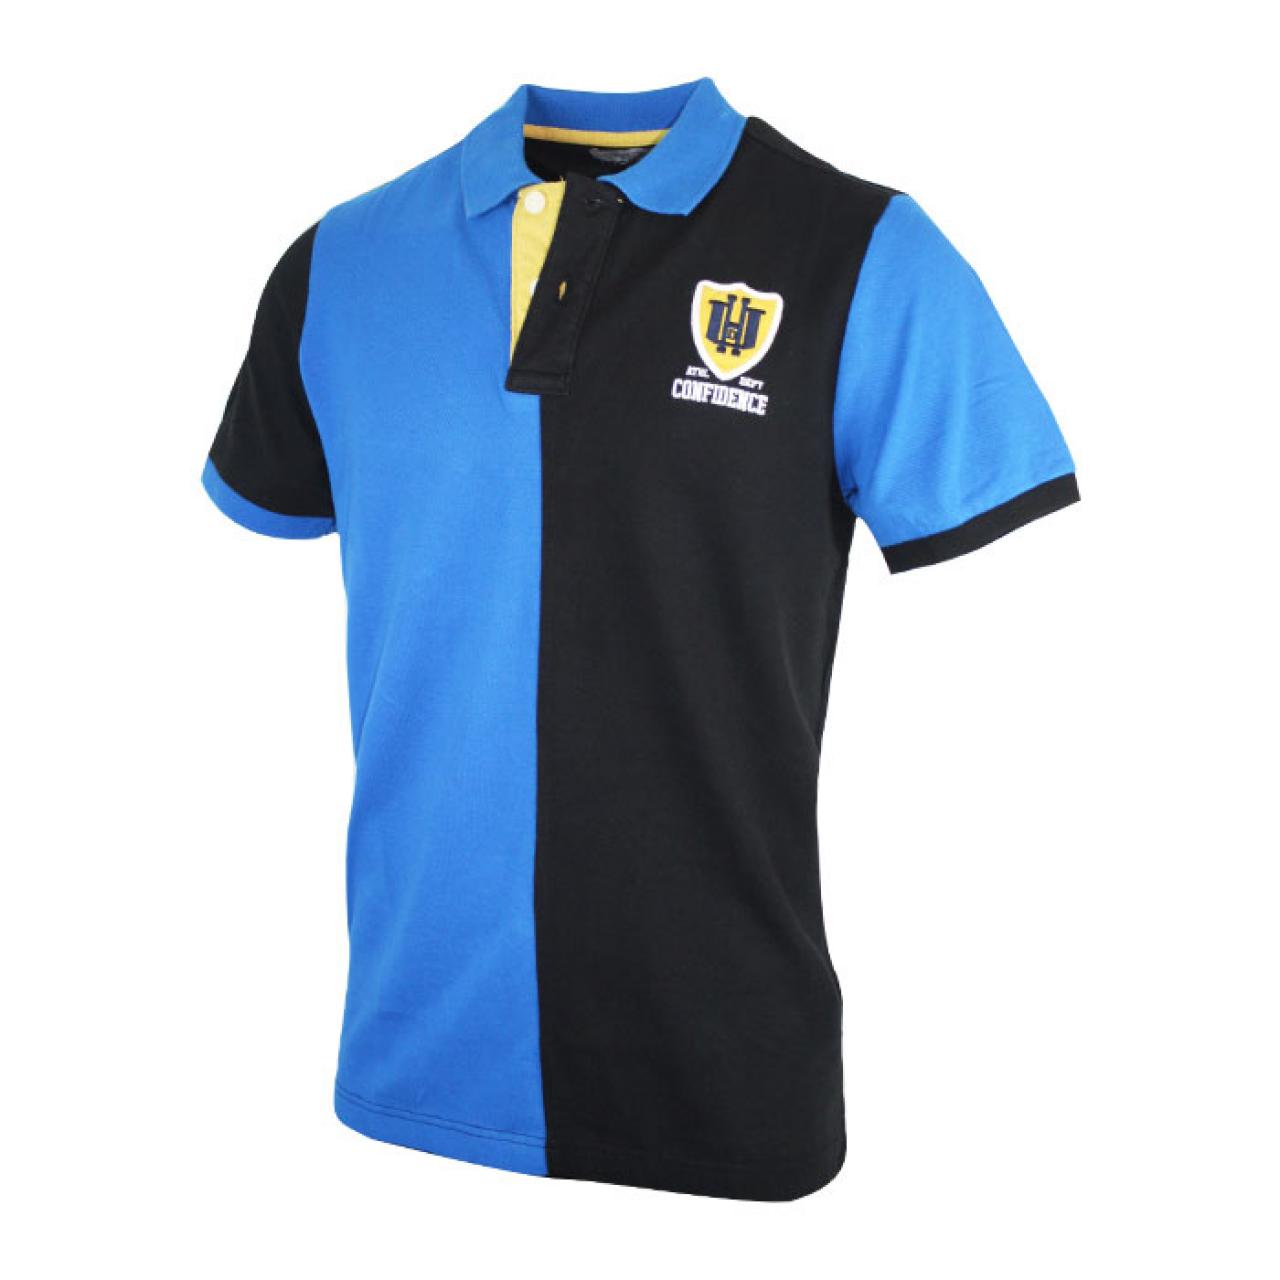 Men's Double Color Designer Polo Shirt Blue And Black Stylish Collared Tees